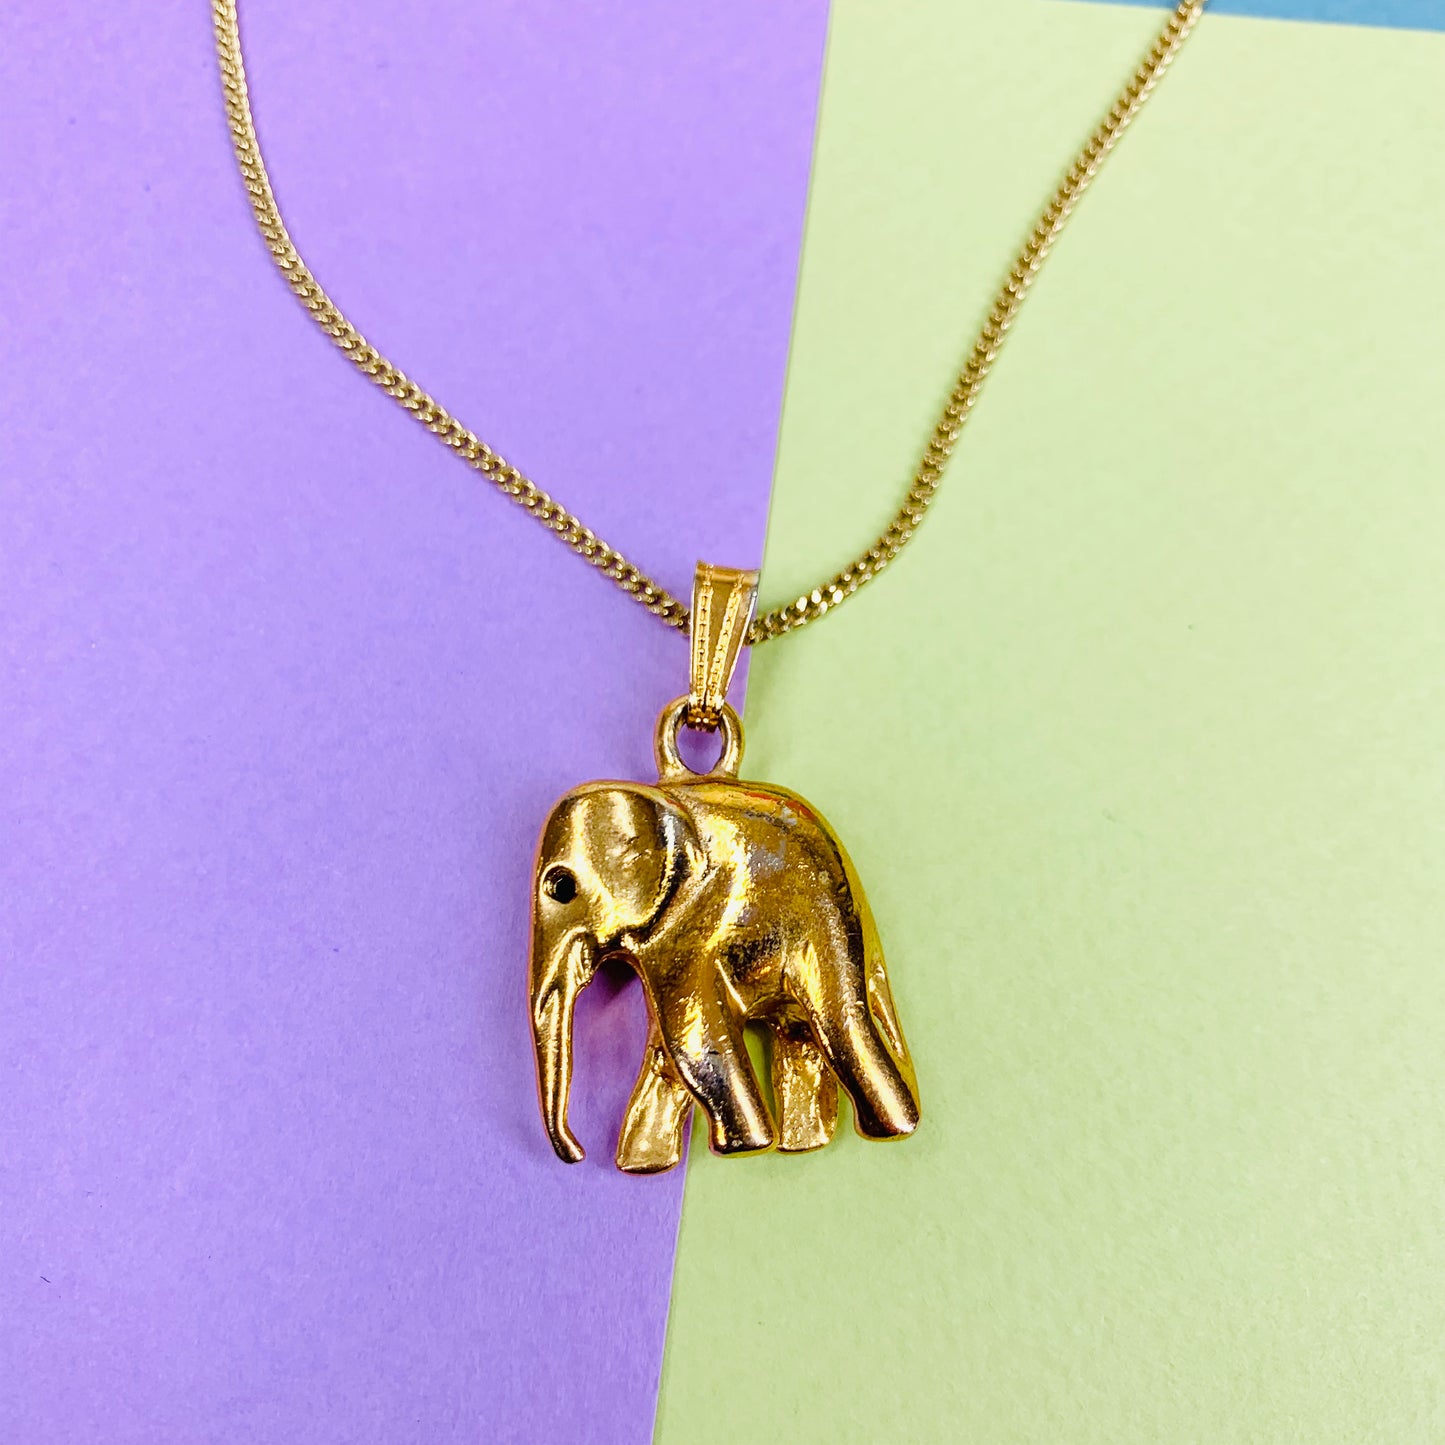 Vintage gold plated necklace with copper elephant pendant